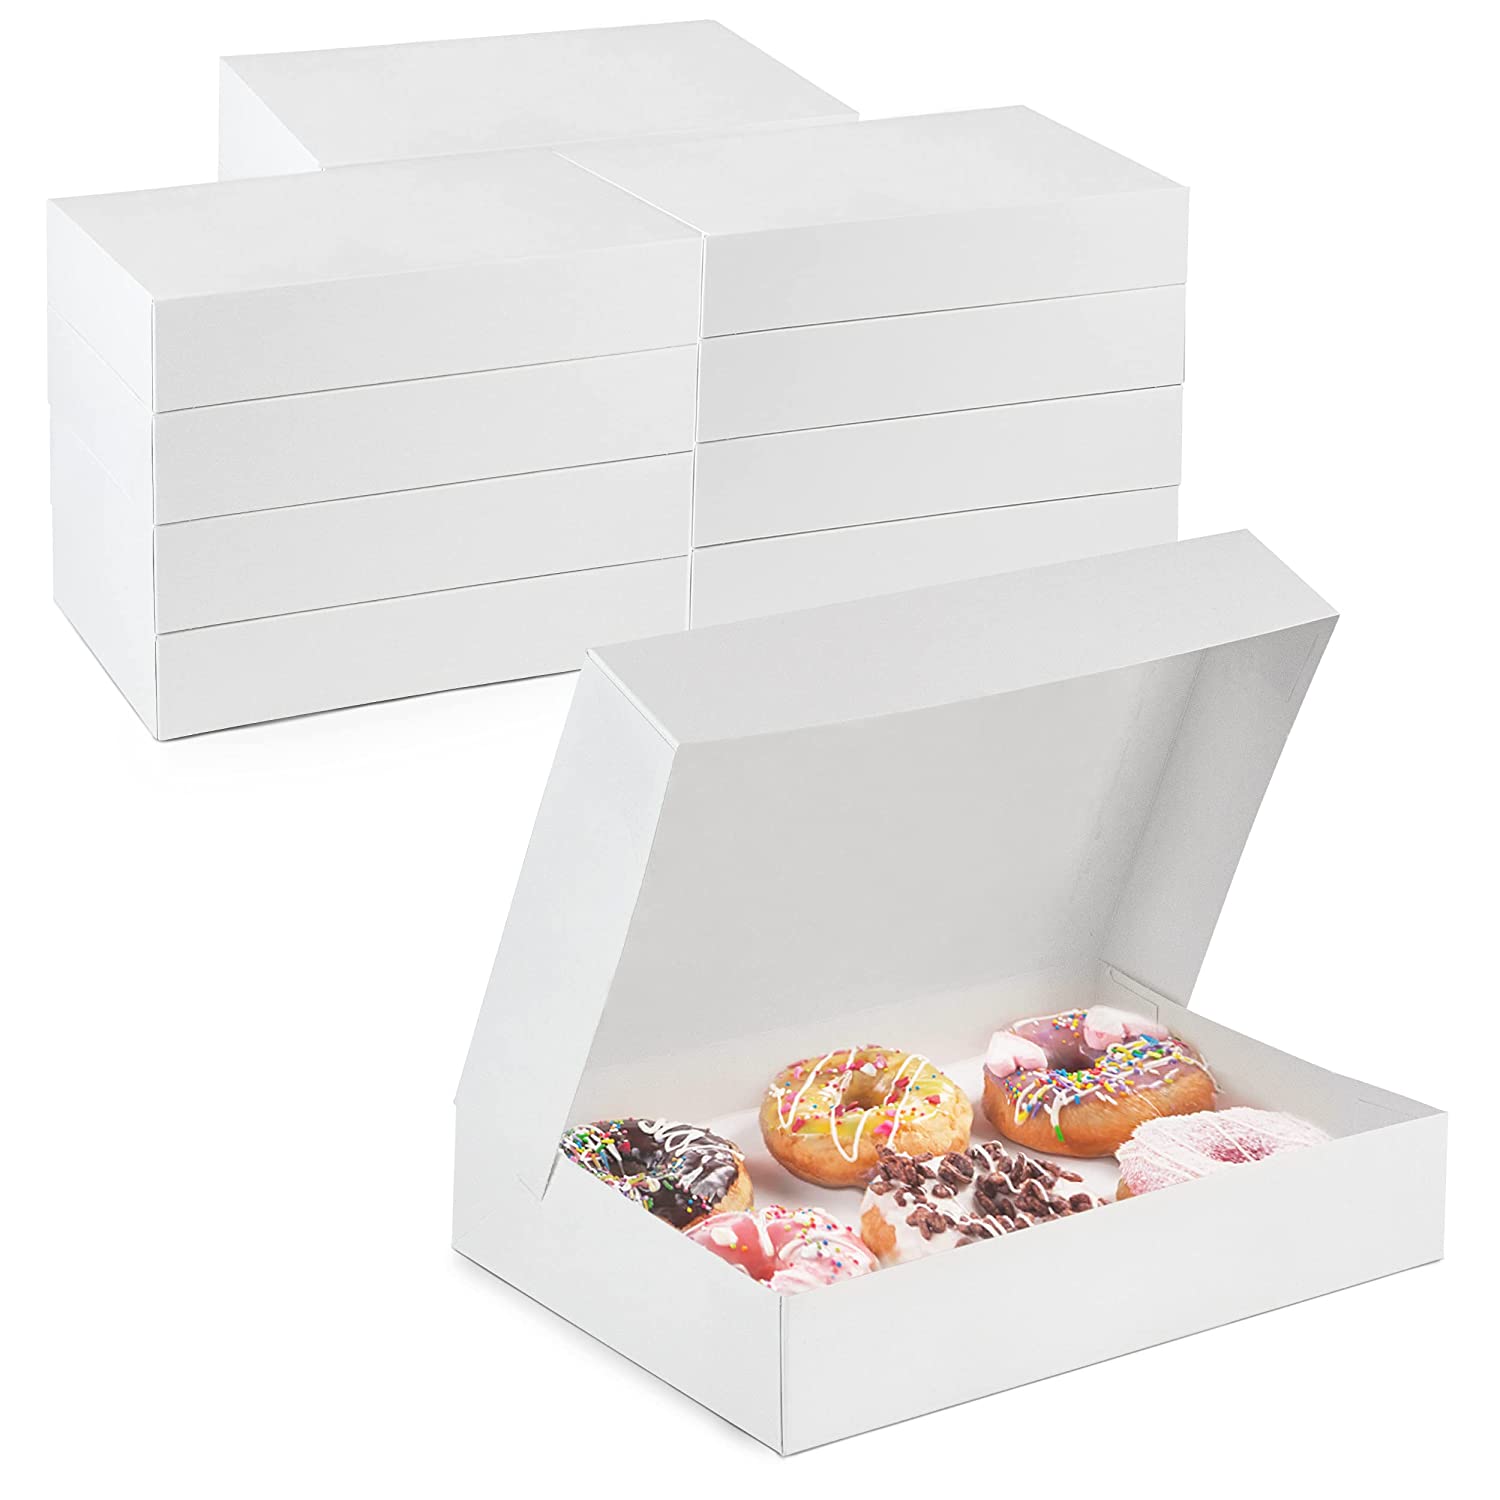 Paper cookie macaron cupcake box donut boxes candy wedding box with clear window